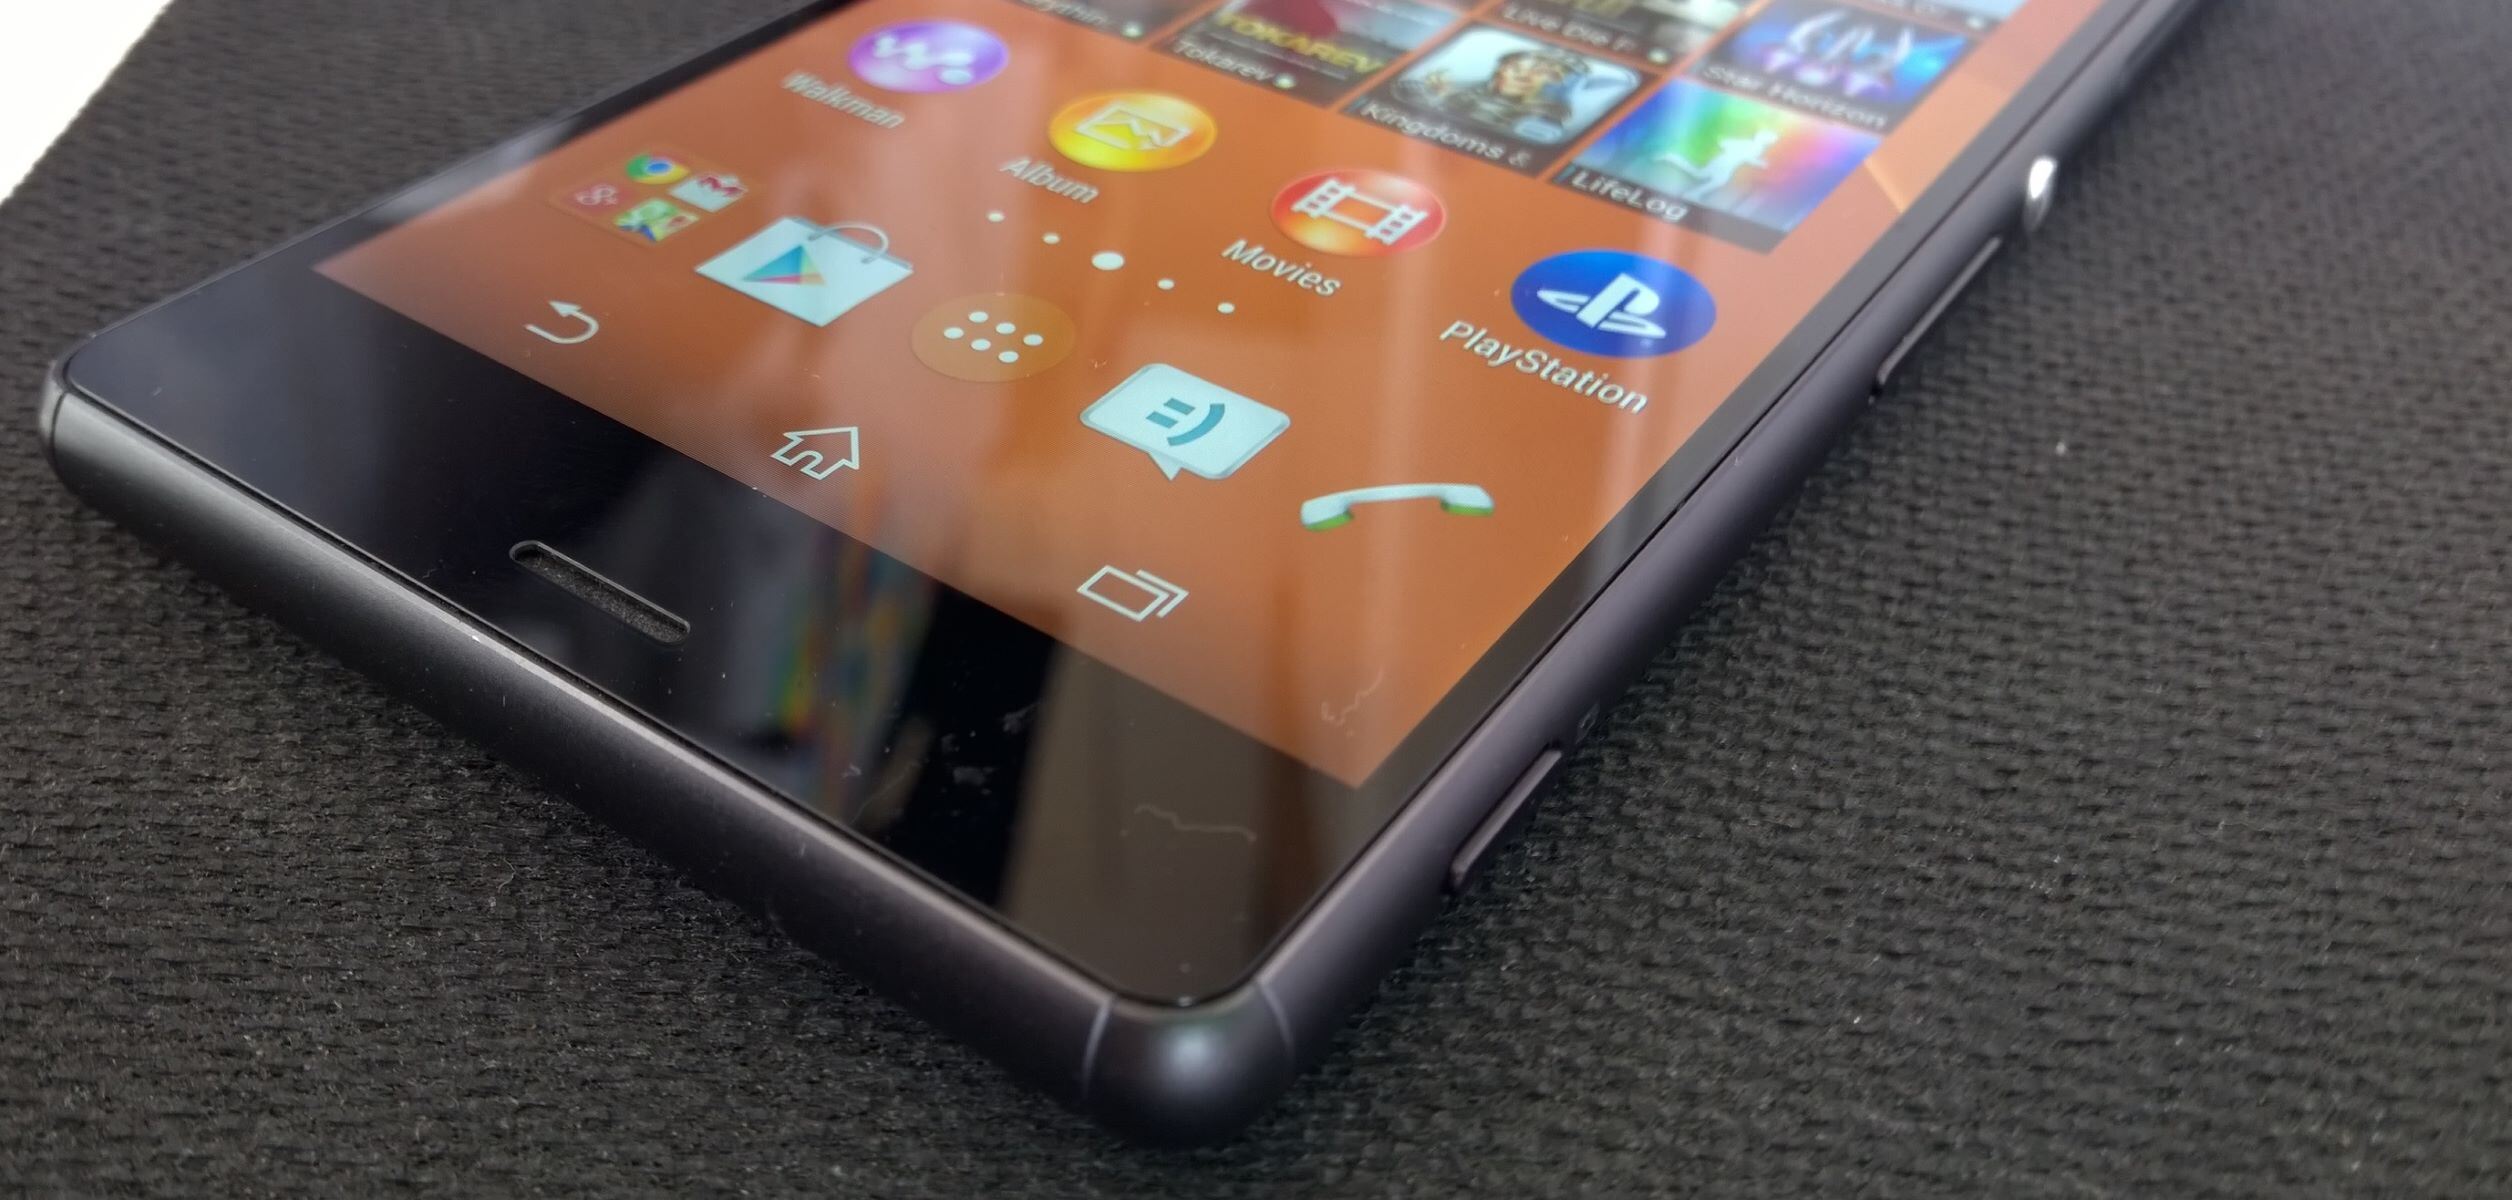 Sony Xperia Z3 Rooting Guide: Maximize Performance